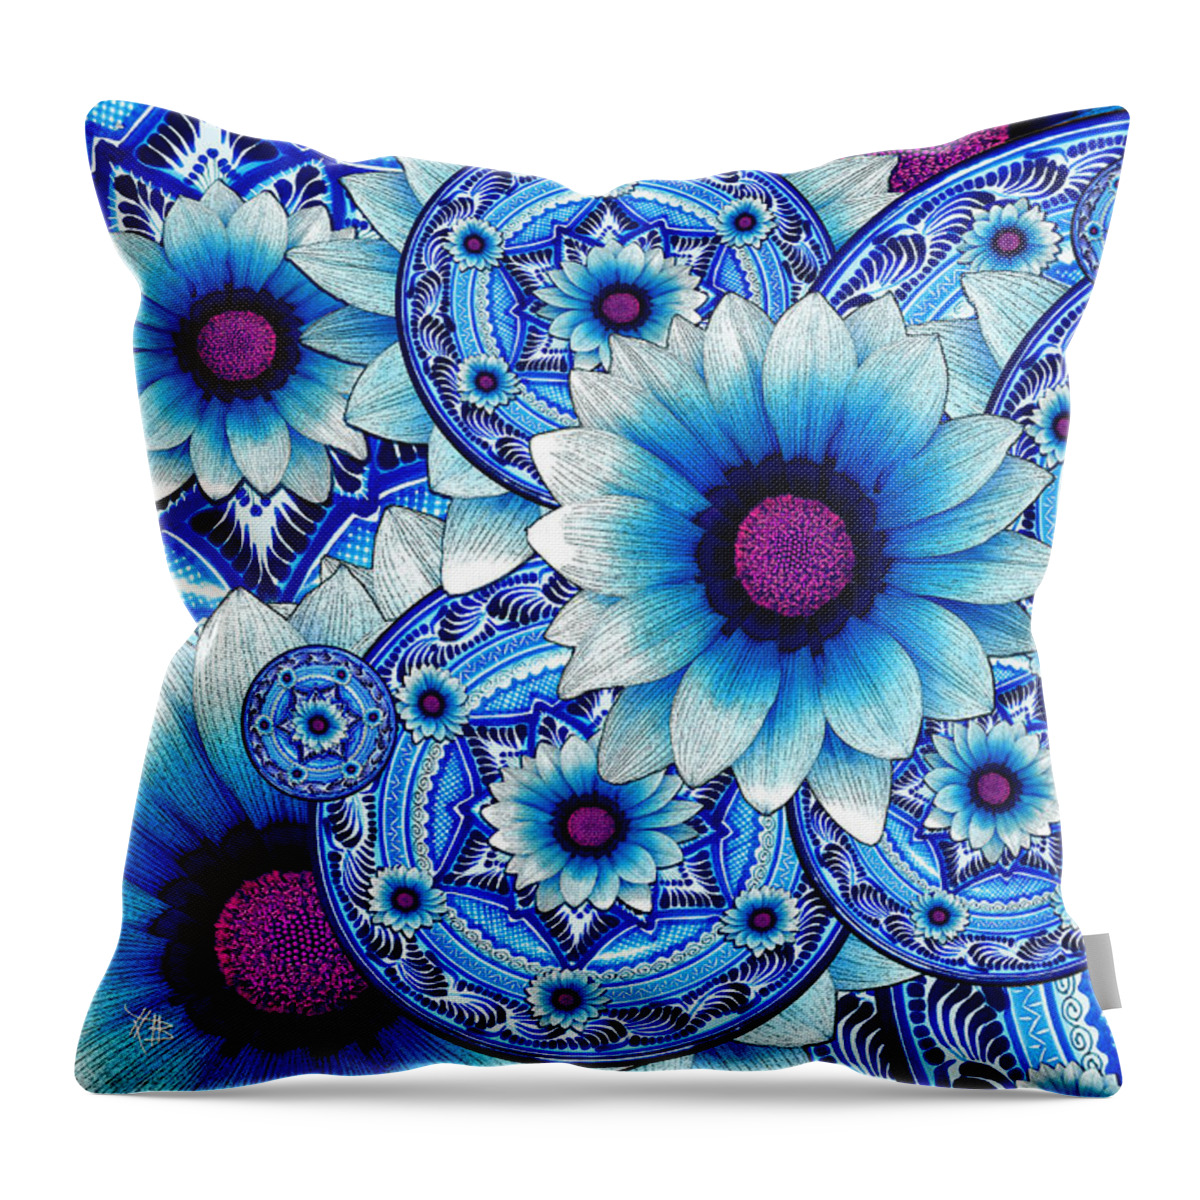 Floral Throw Pillow featuring the mixed media Talavera Alejandra by Christopher Beikmann